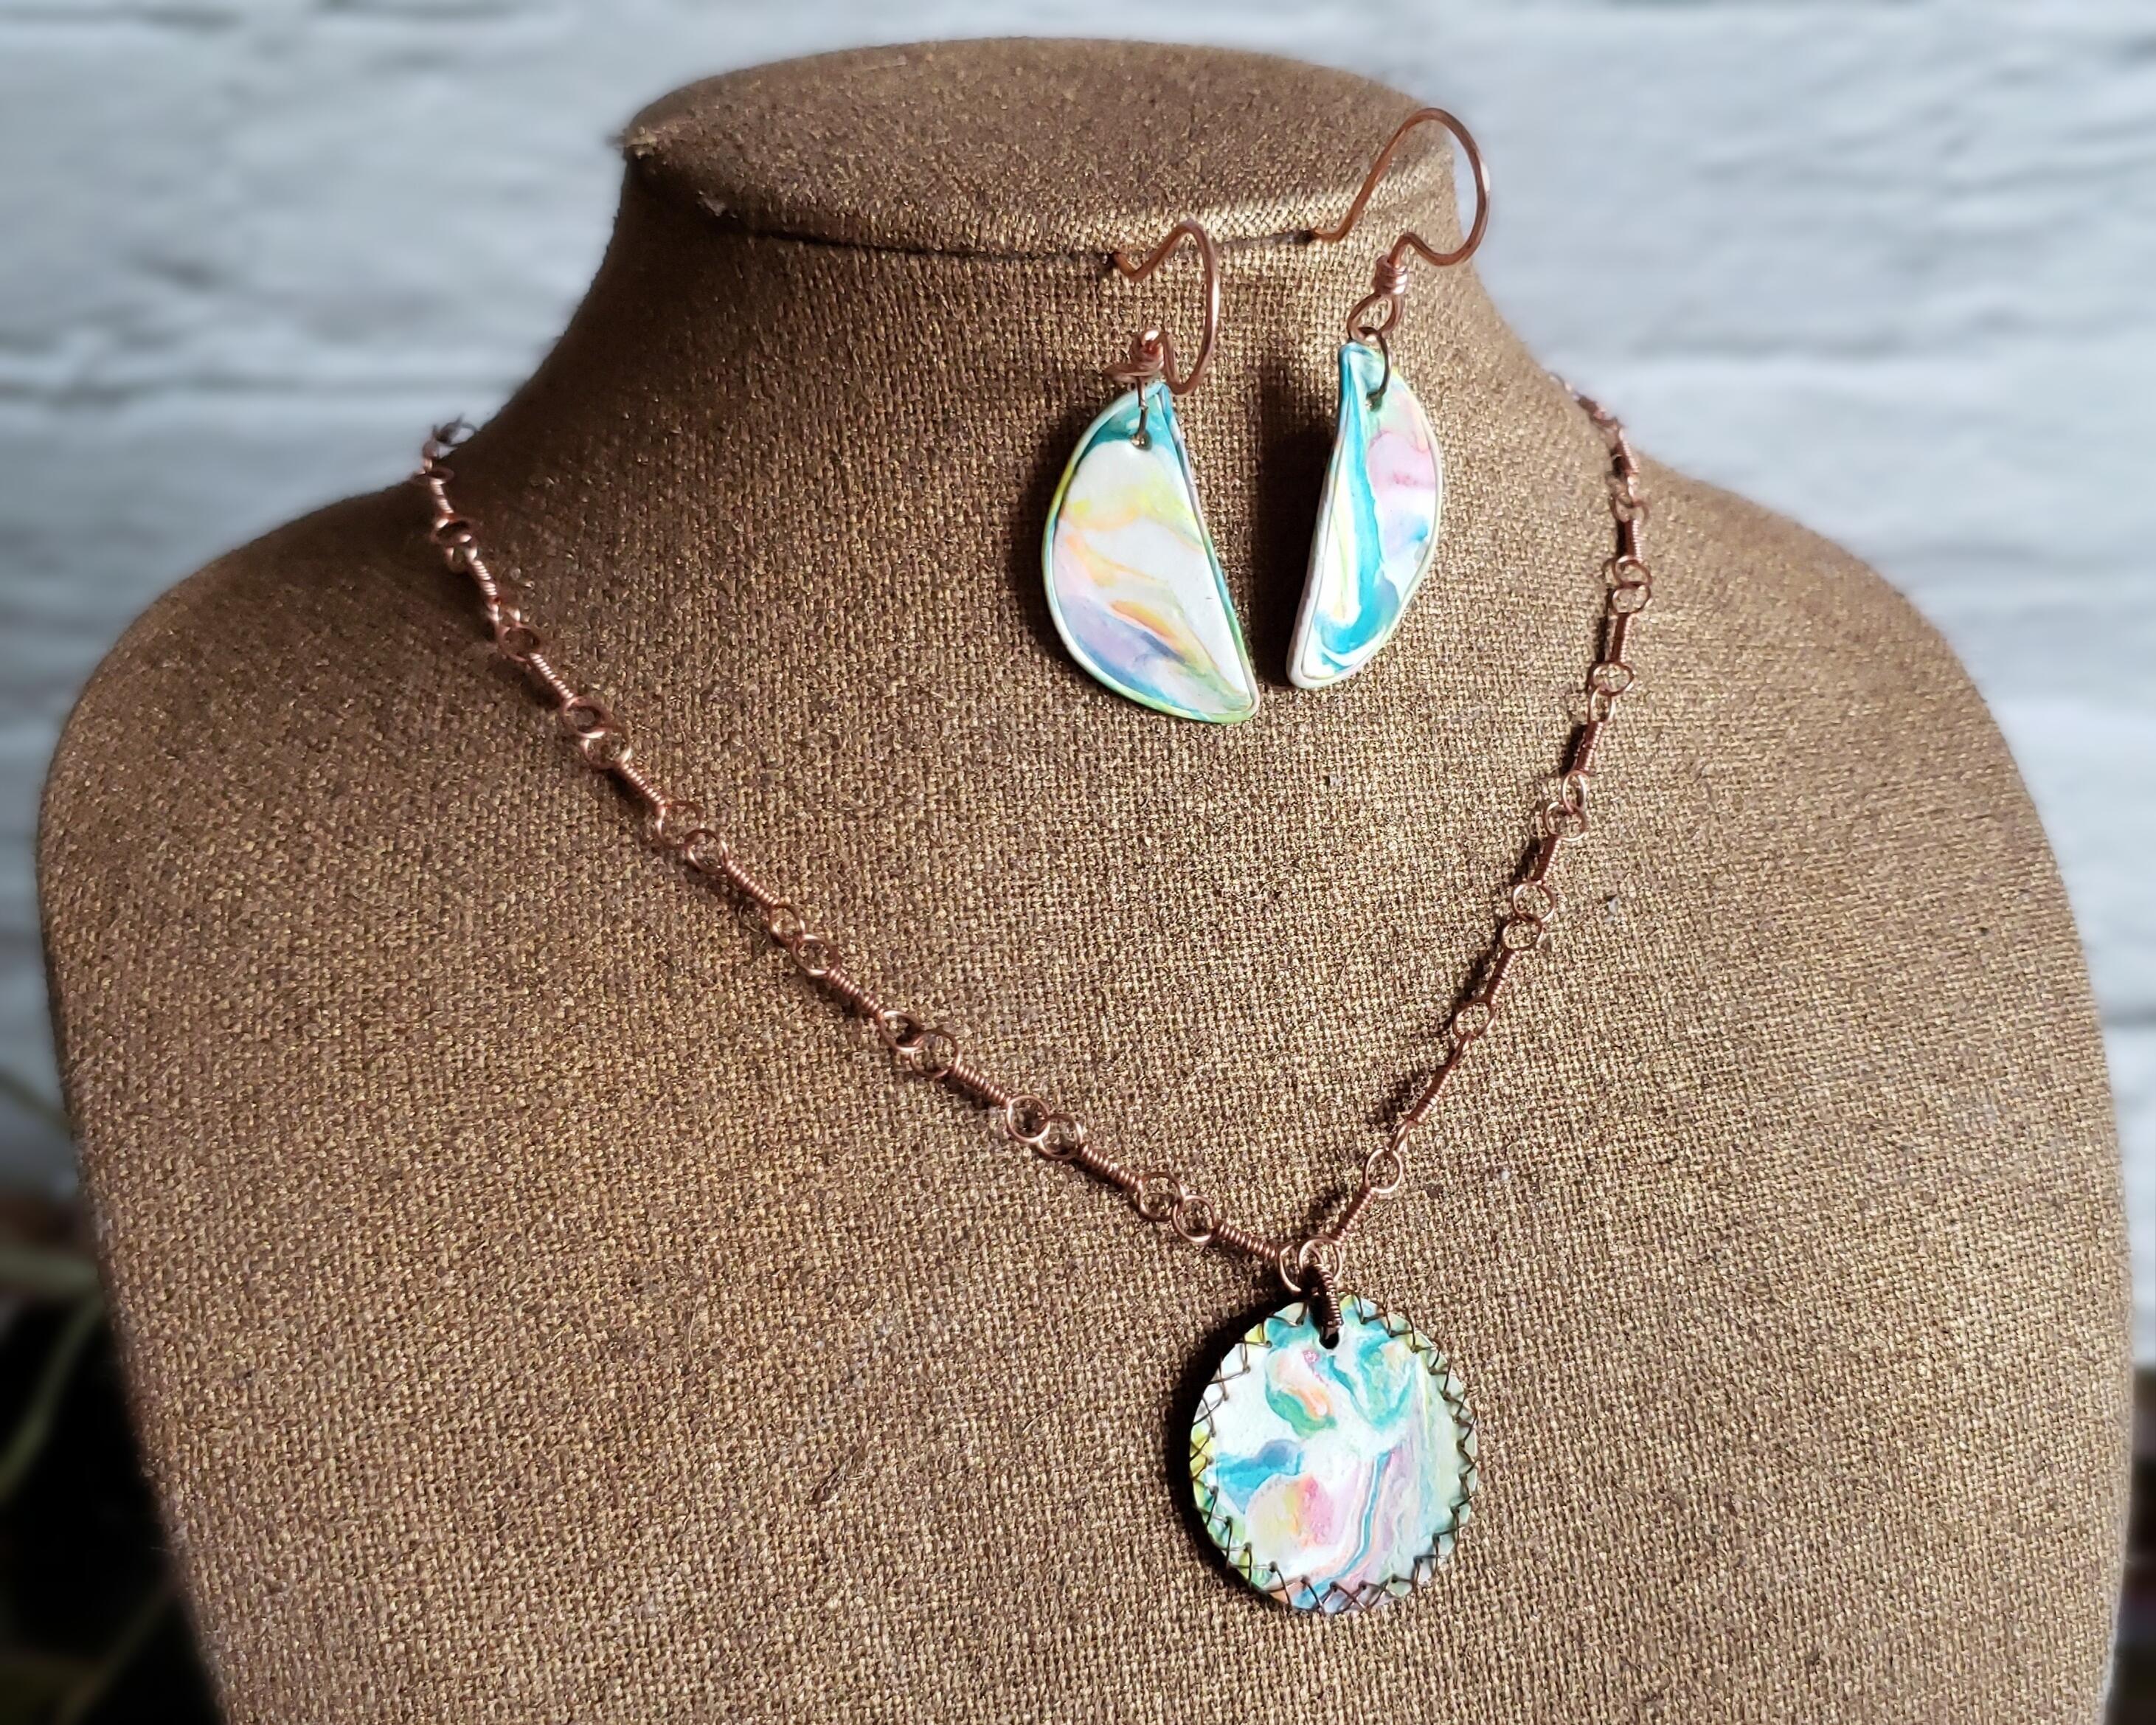 Watercolor Copper Necklace and Earrings Jewelry Set